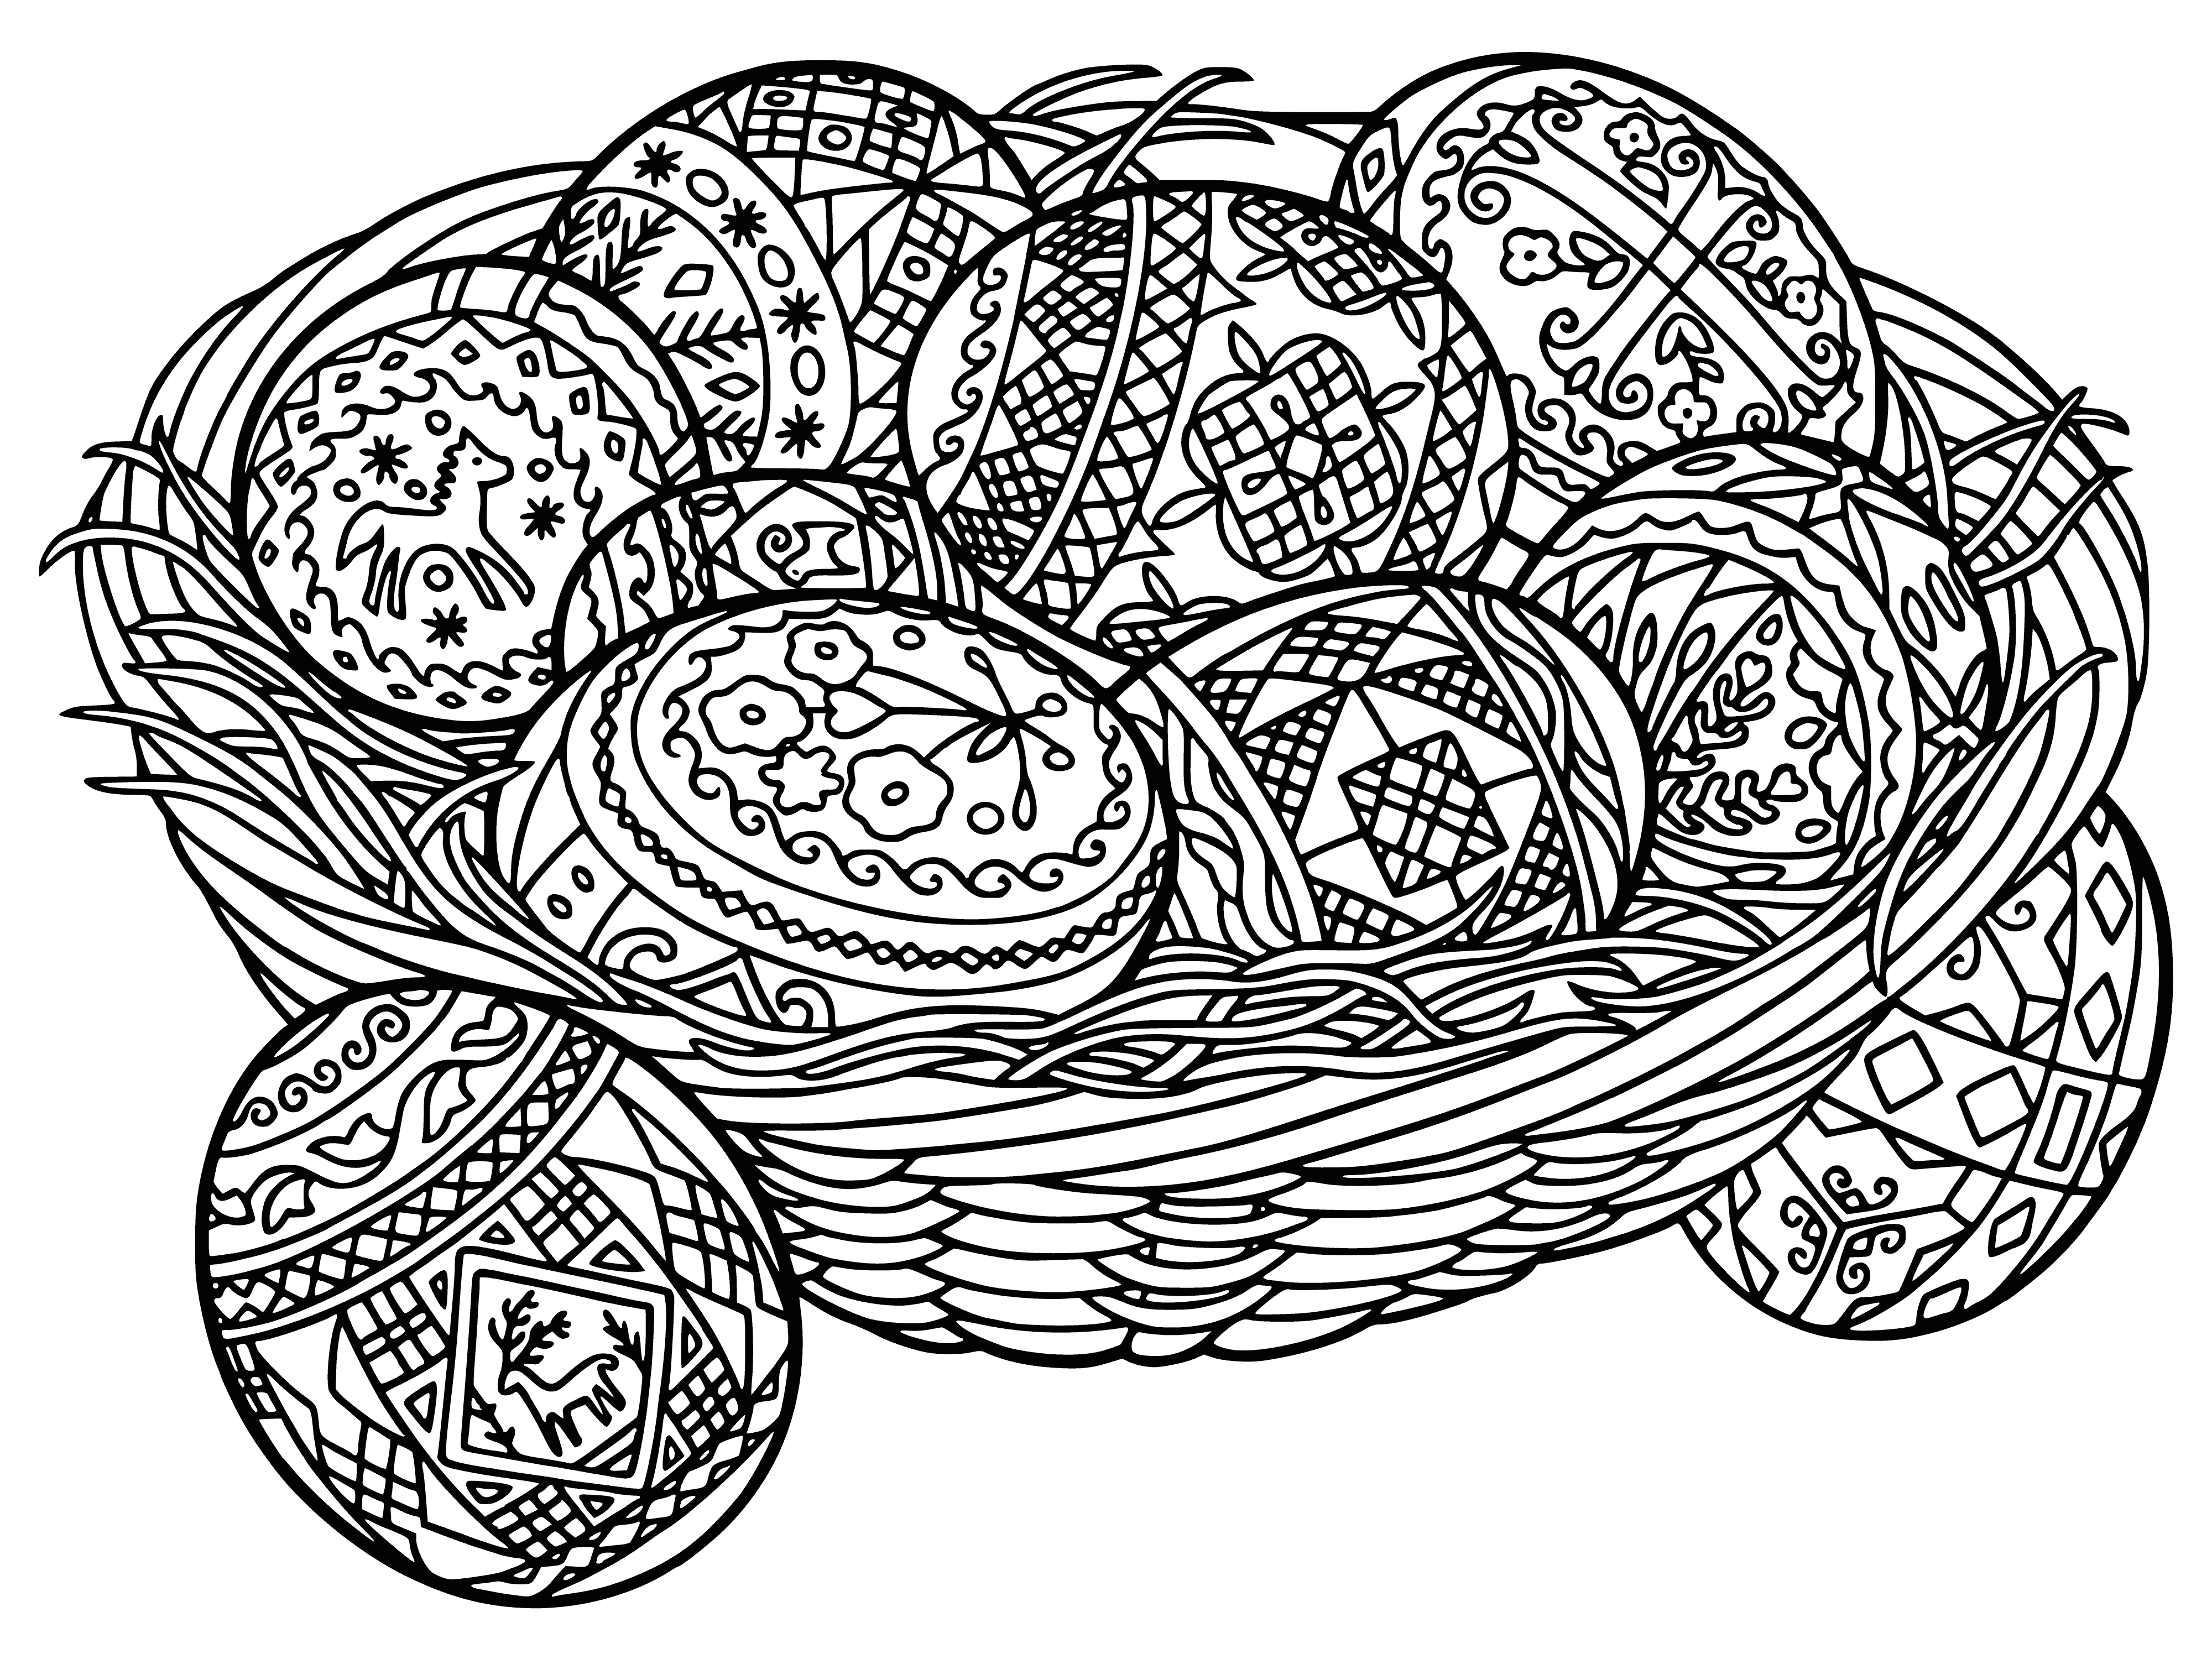 coloring page: The eggs are brightly colored and represent new beginnings. #Easter #FamilyFun